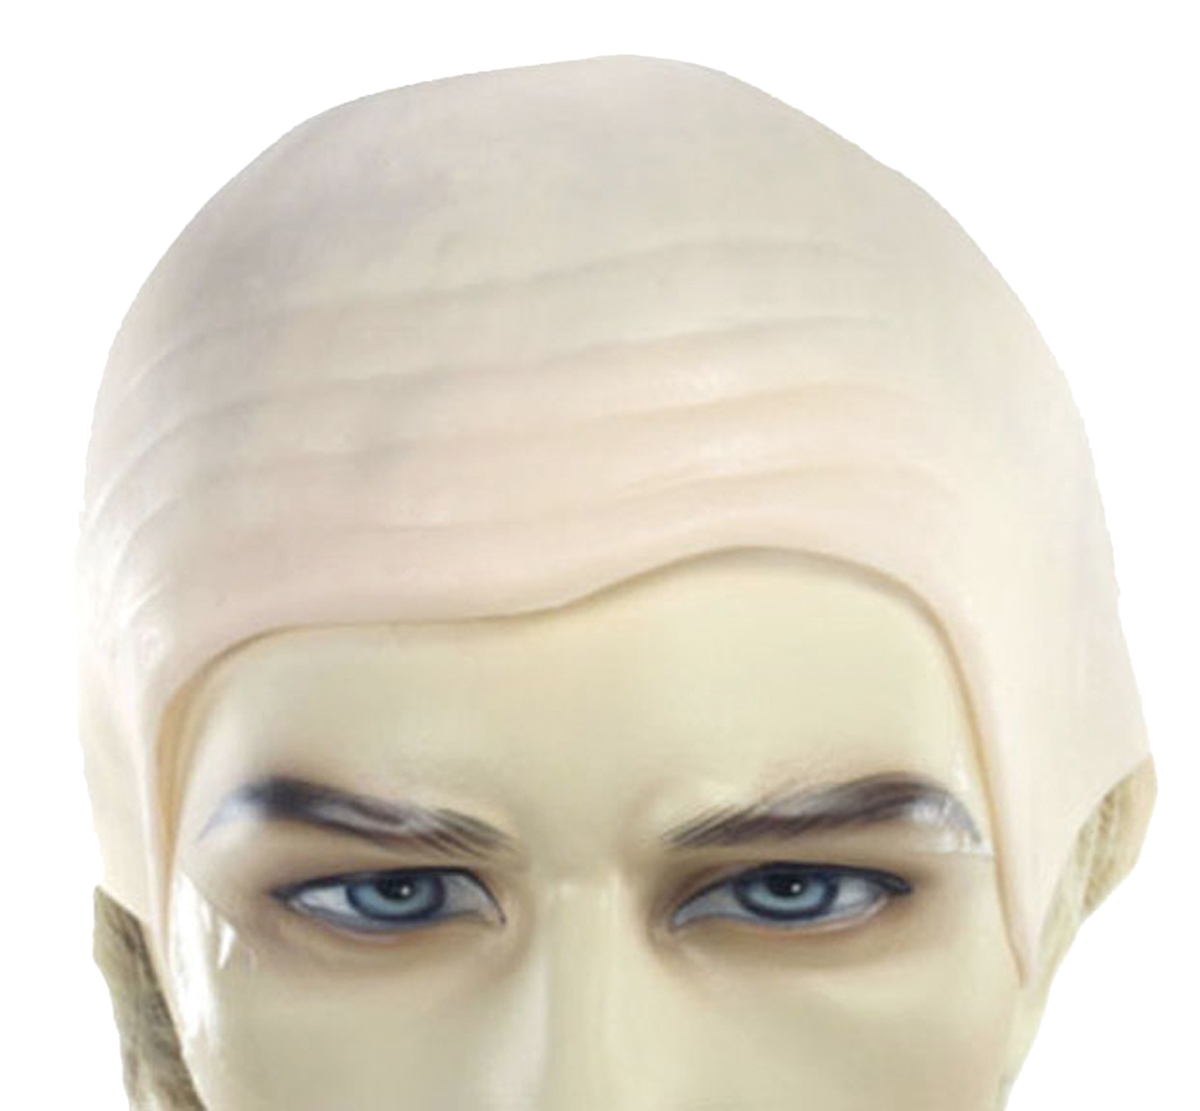 Picture of Morris Costumes LW599SM Bald Cap Kryolan Latex Costume, Small